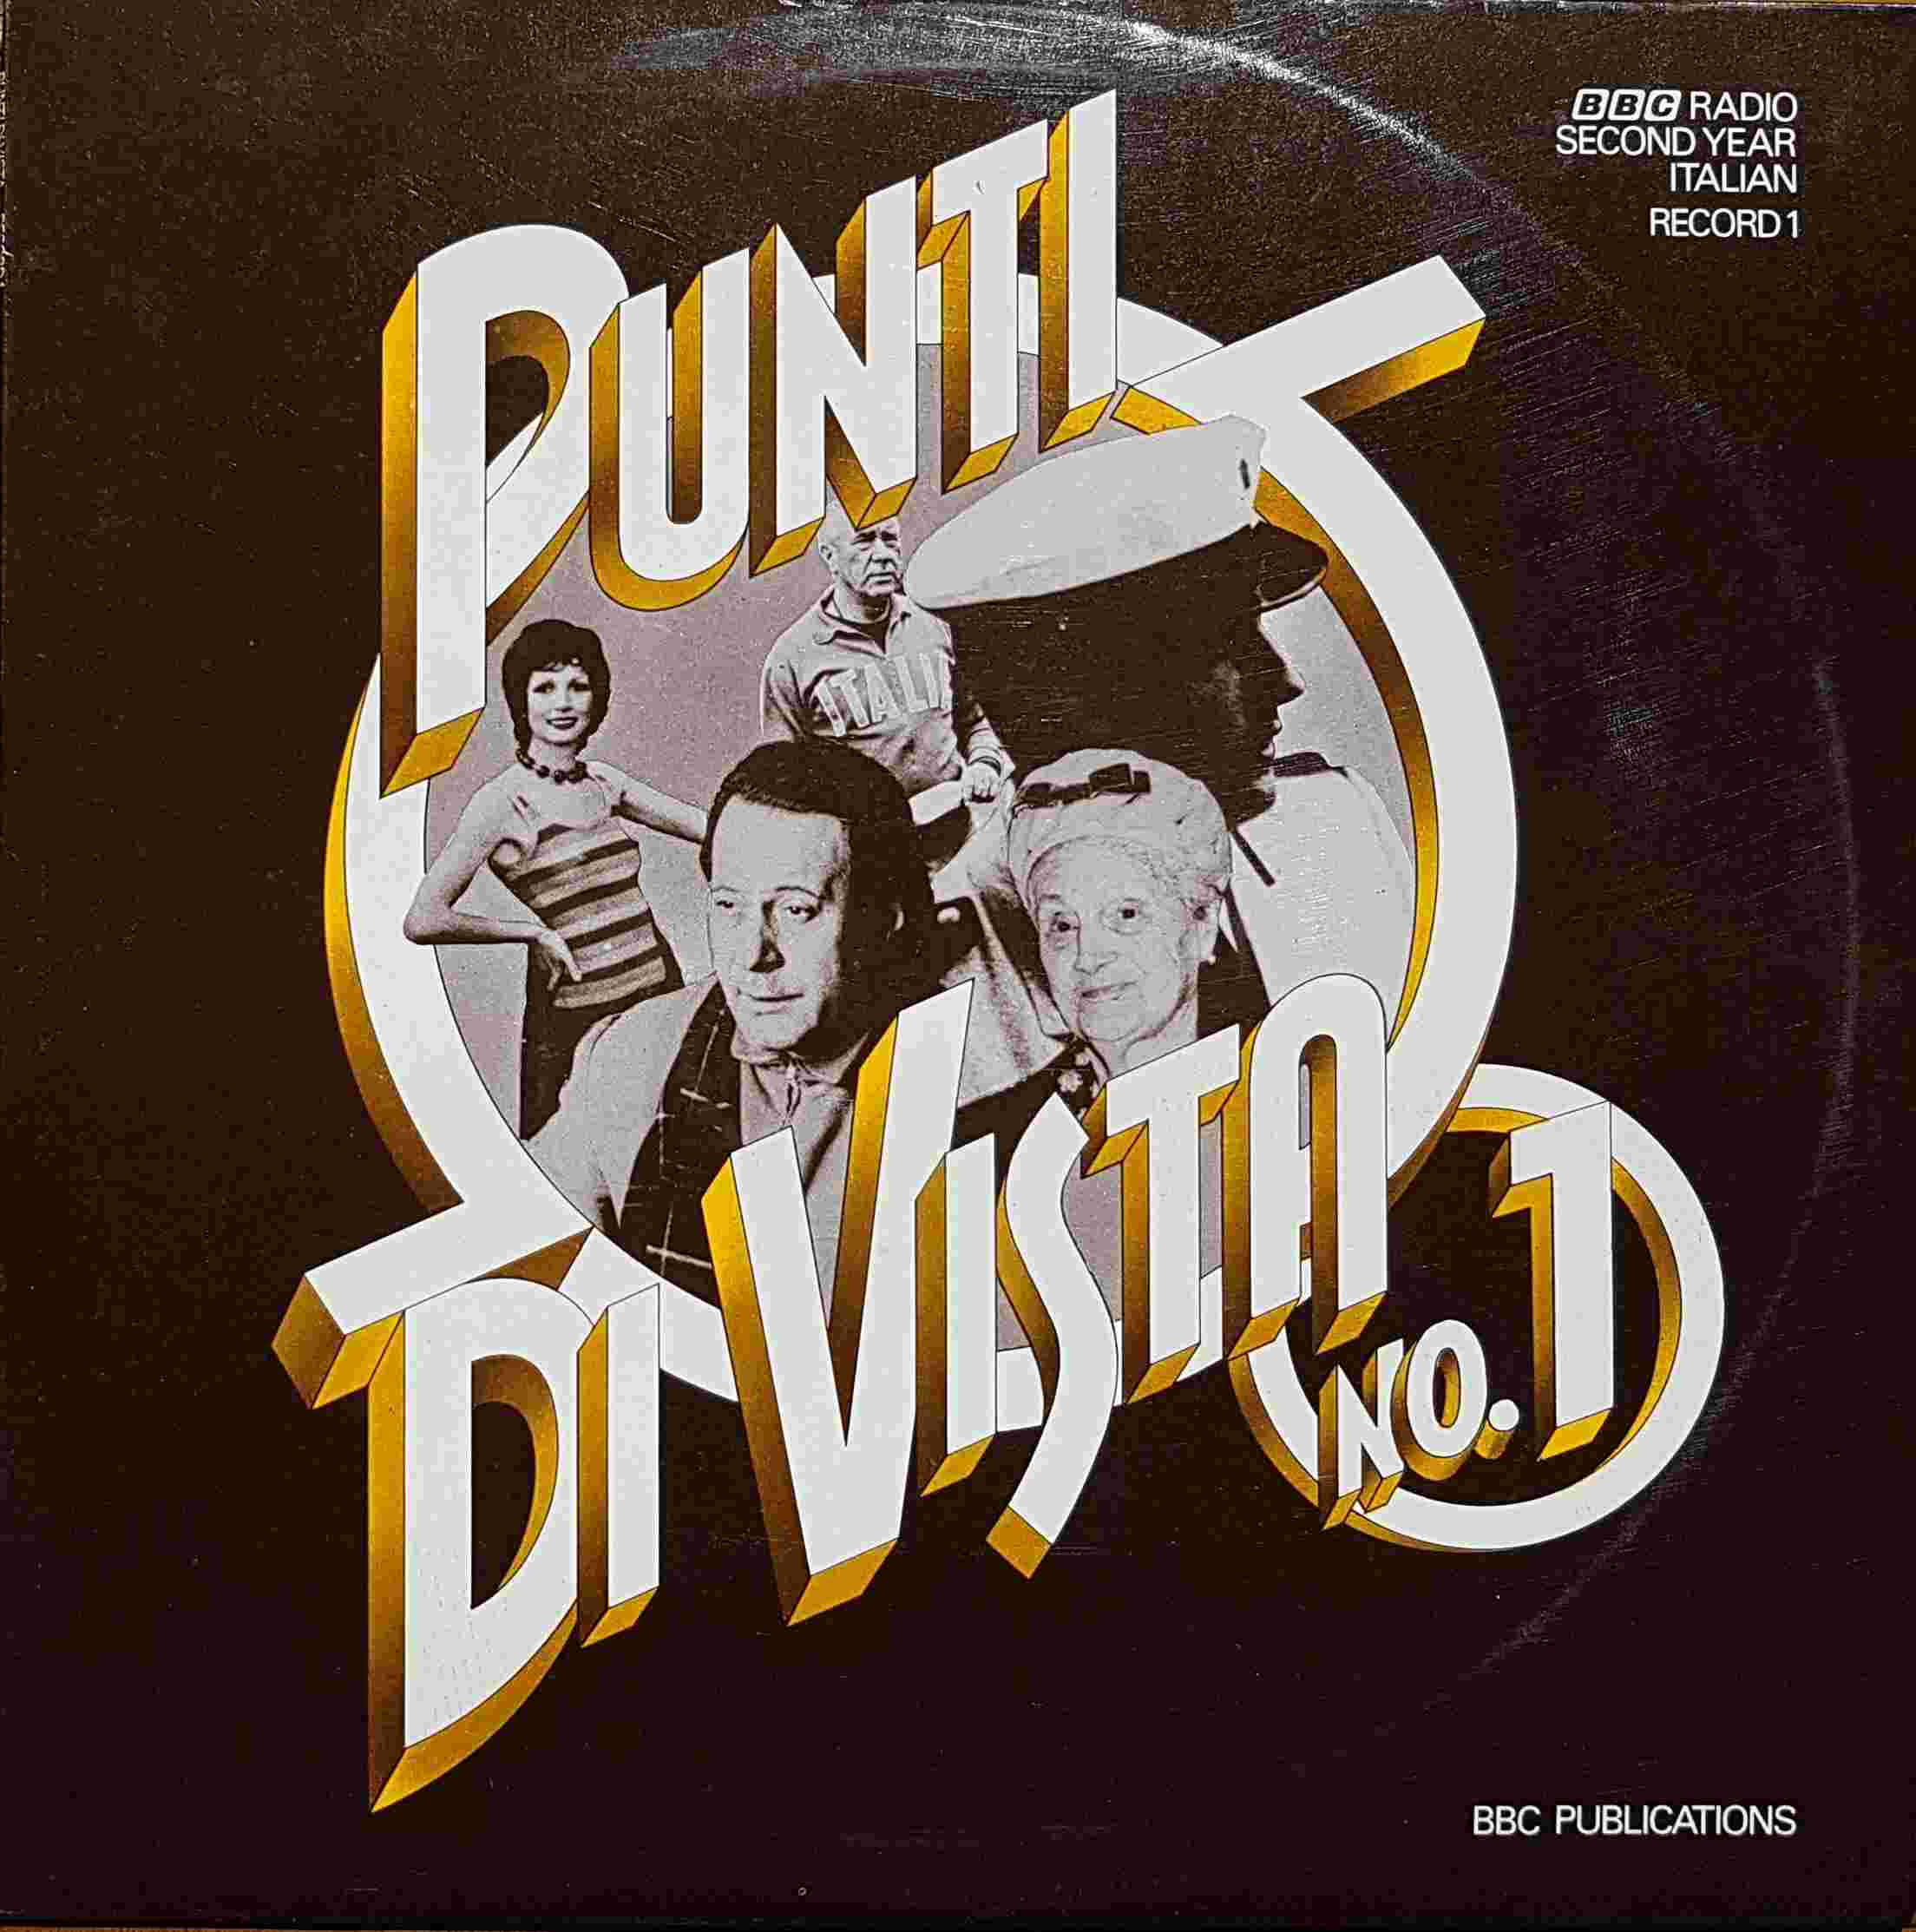 Picture of OP 193/194 Punti di vista - BBC Radio second year Italian - Record 1 - Programmes 1 - 10 by artist Various from the BBC albums - Records and Tapes library